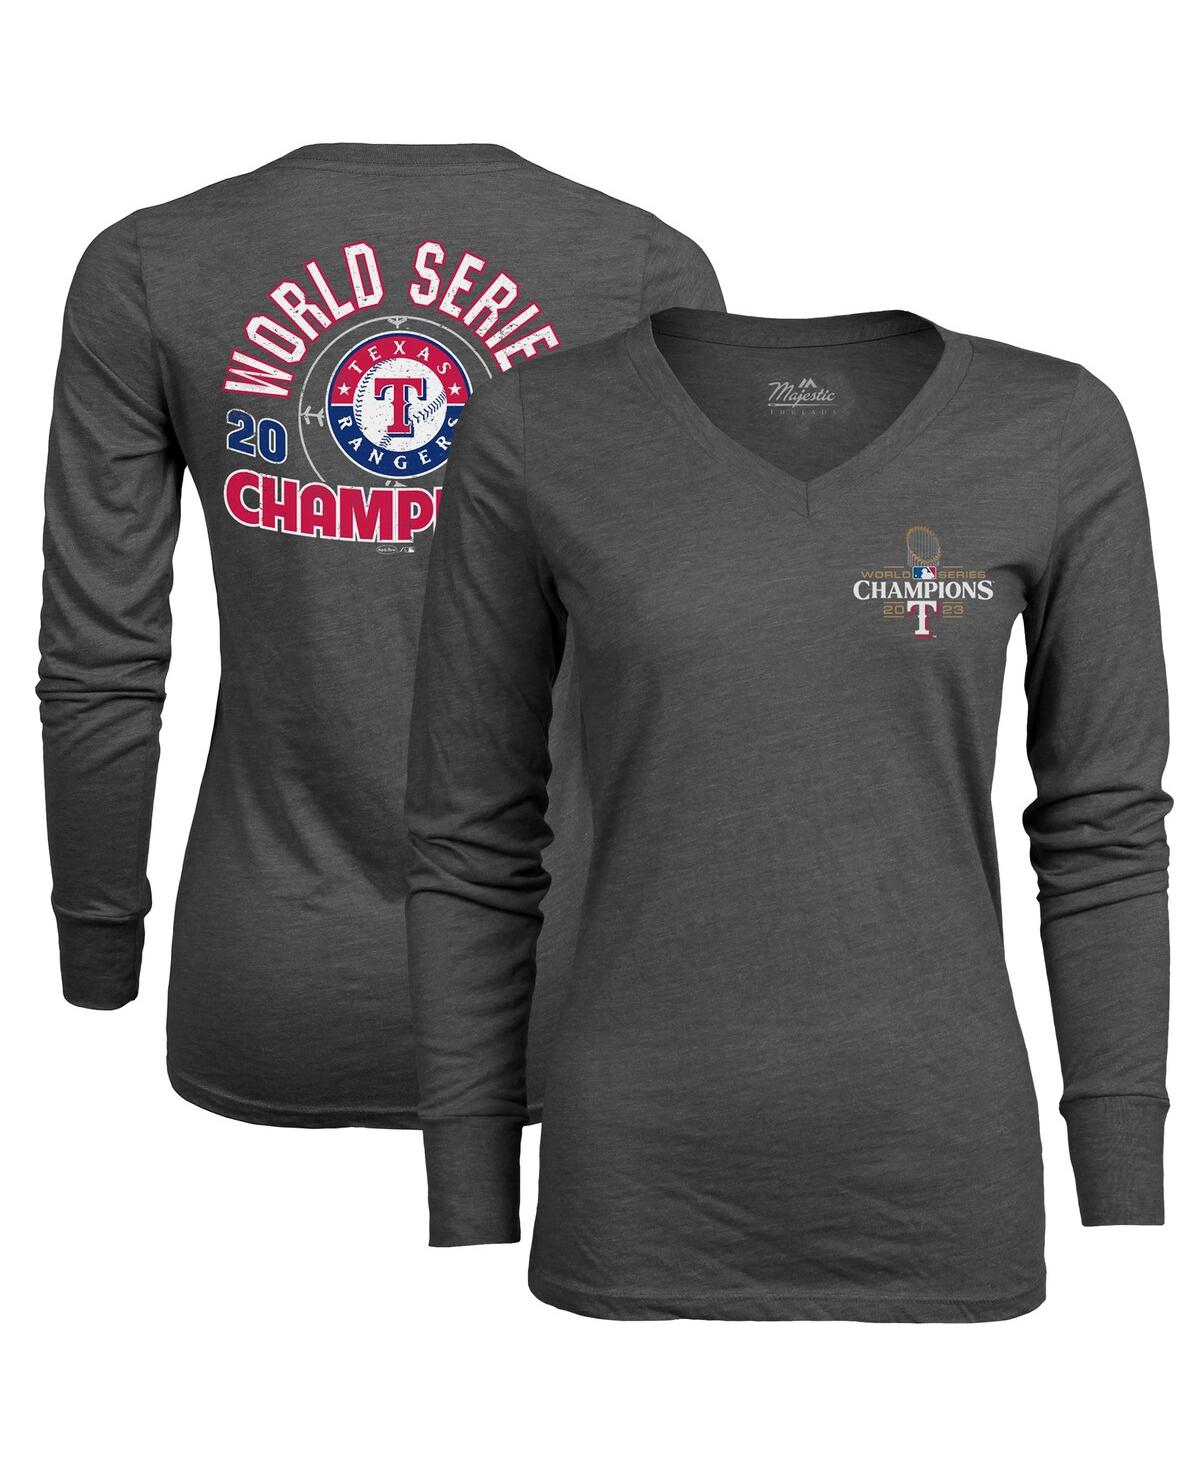 Women's Majestic Threads Charcoal Texas Rangers 2023 World Series Champions Power Play Tri-Blend V-Neck T-shirt - Charcoal